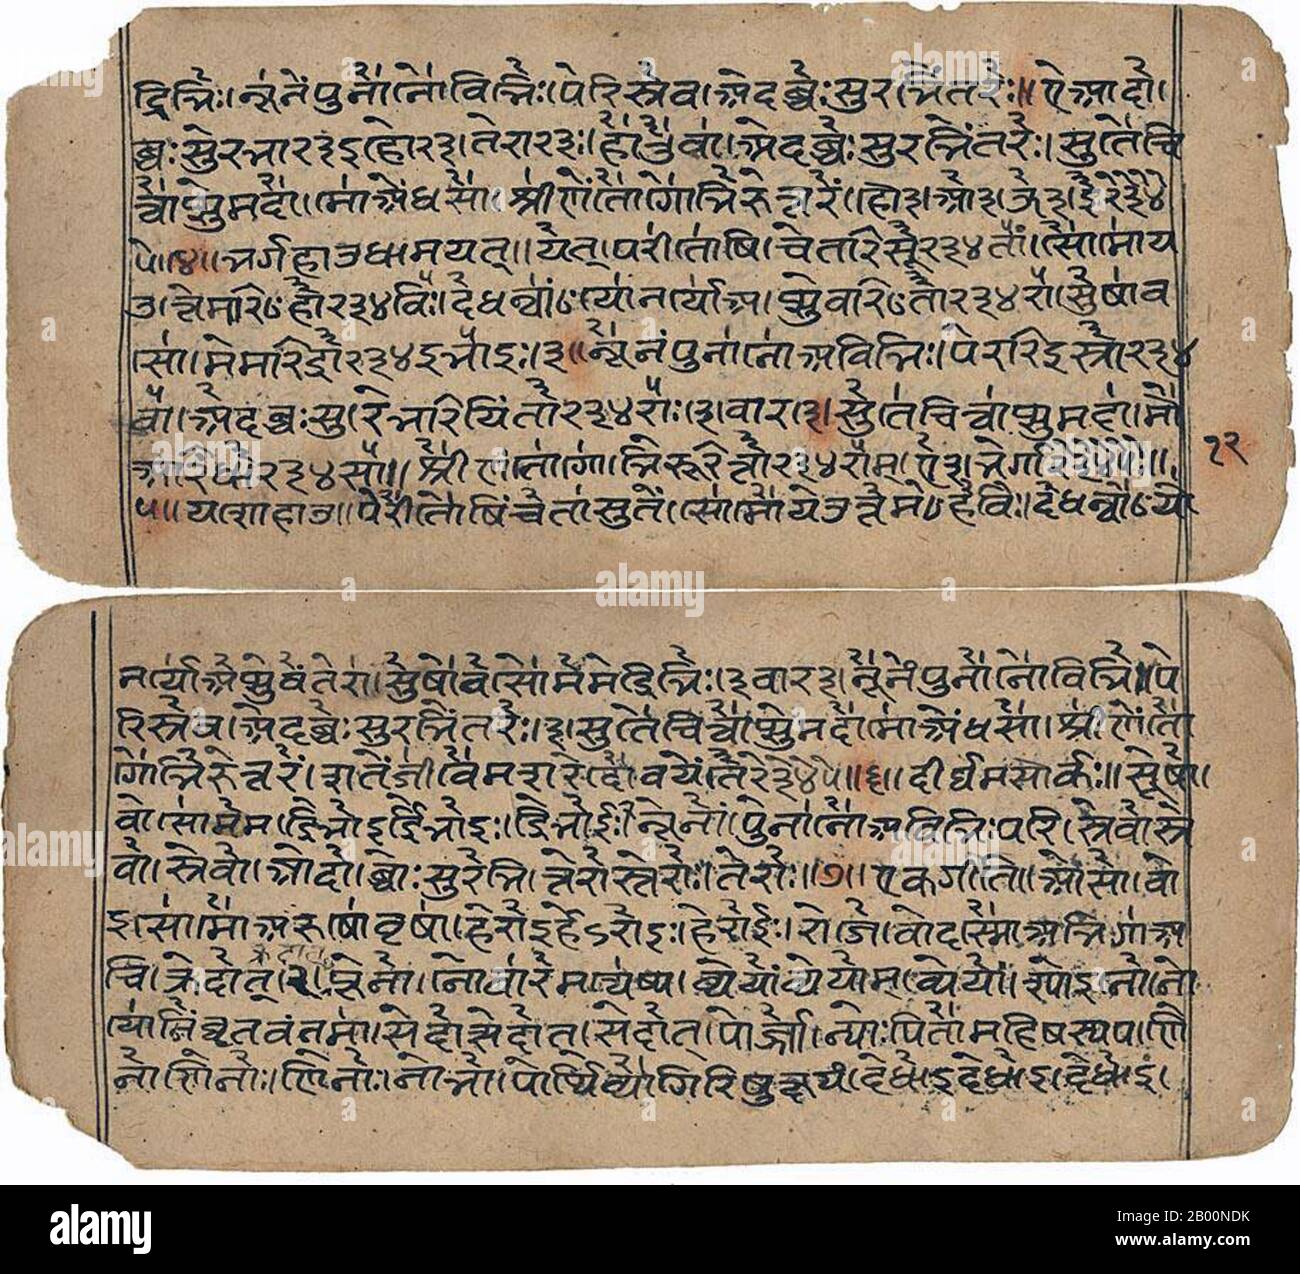 India: Sanskrit script. Uhagana; Book of Chants. India, 1583.  Sanskrit is the primary liturgical language of Hinduism, a philosophical language in Hinduism, Buddhism, and Jainism, and a scholarly literary language that was in use as a lingua franca in the Indian cultural zone.  It is a standardized dialect of Old Indo-Aryan, originating as Vedic Sanskrit and tracing its linguistic ancestry back to Proto-Indo-Iranian and ultimately to Proto-Indo-European. Stock Photo